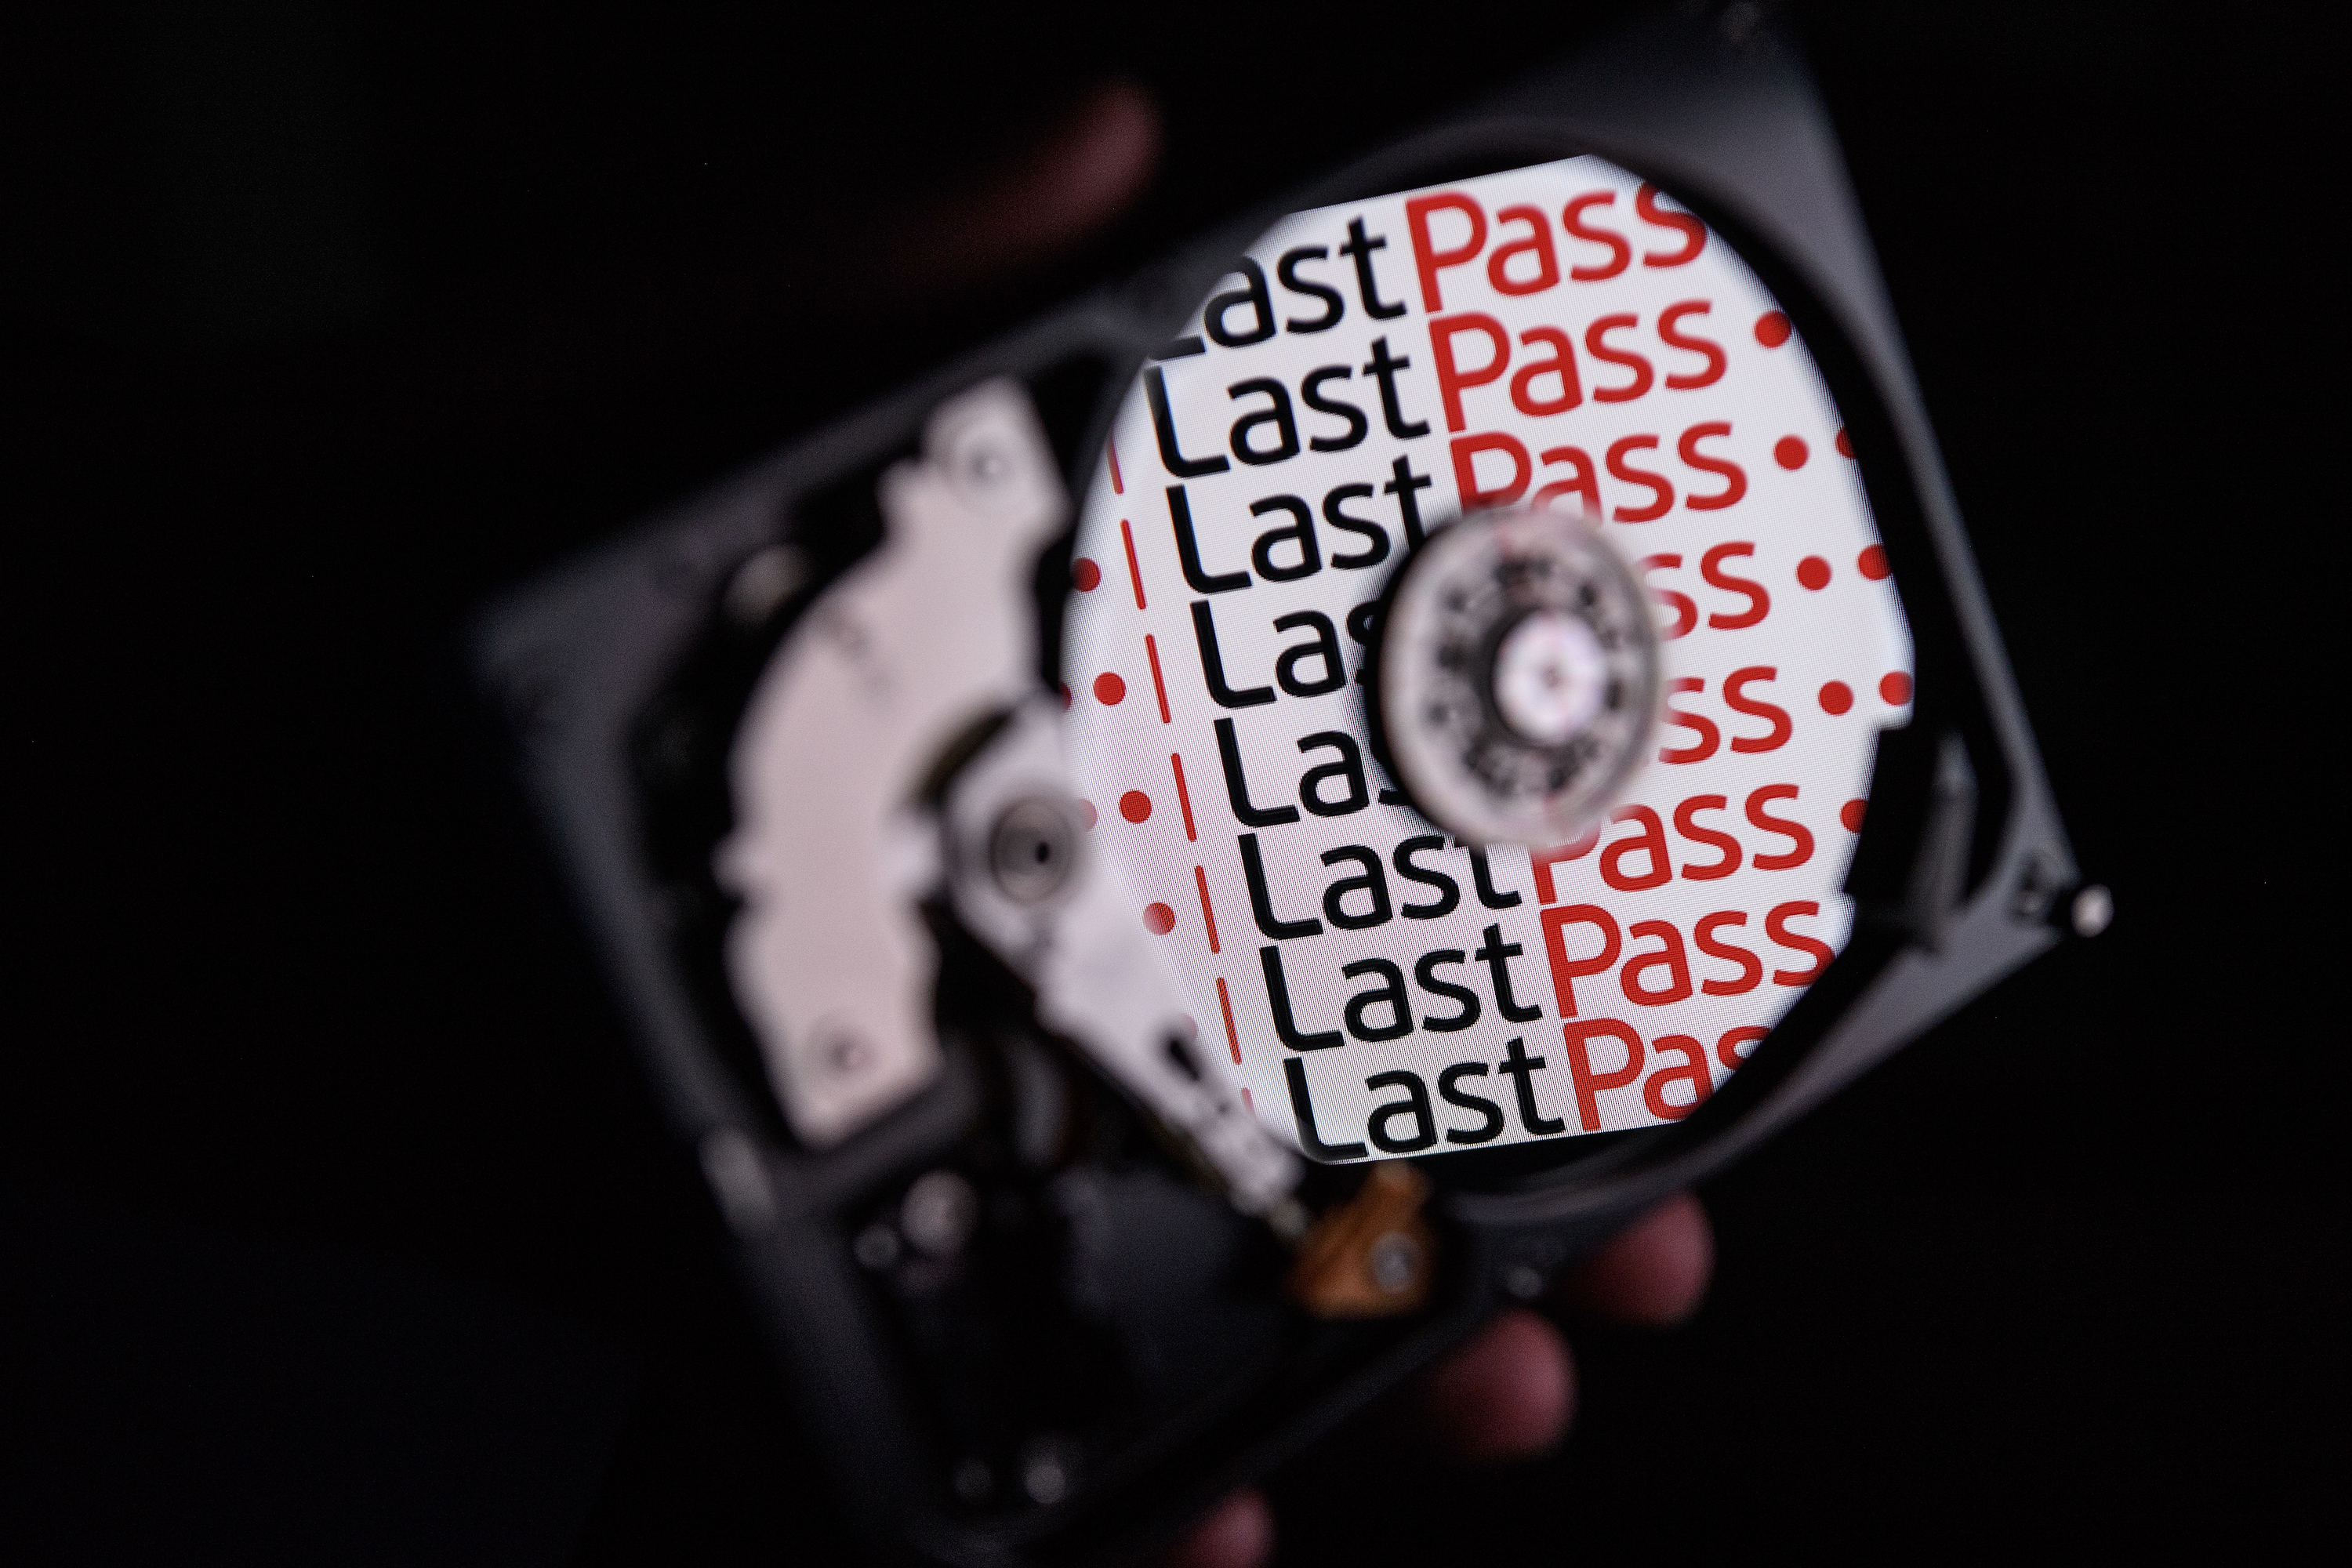 LastPass Free Accounts Will Now Work on Either Your Phone or Computer, Not Both